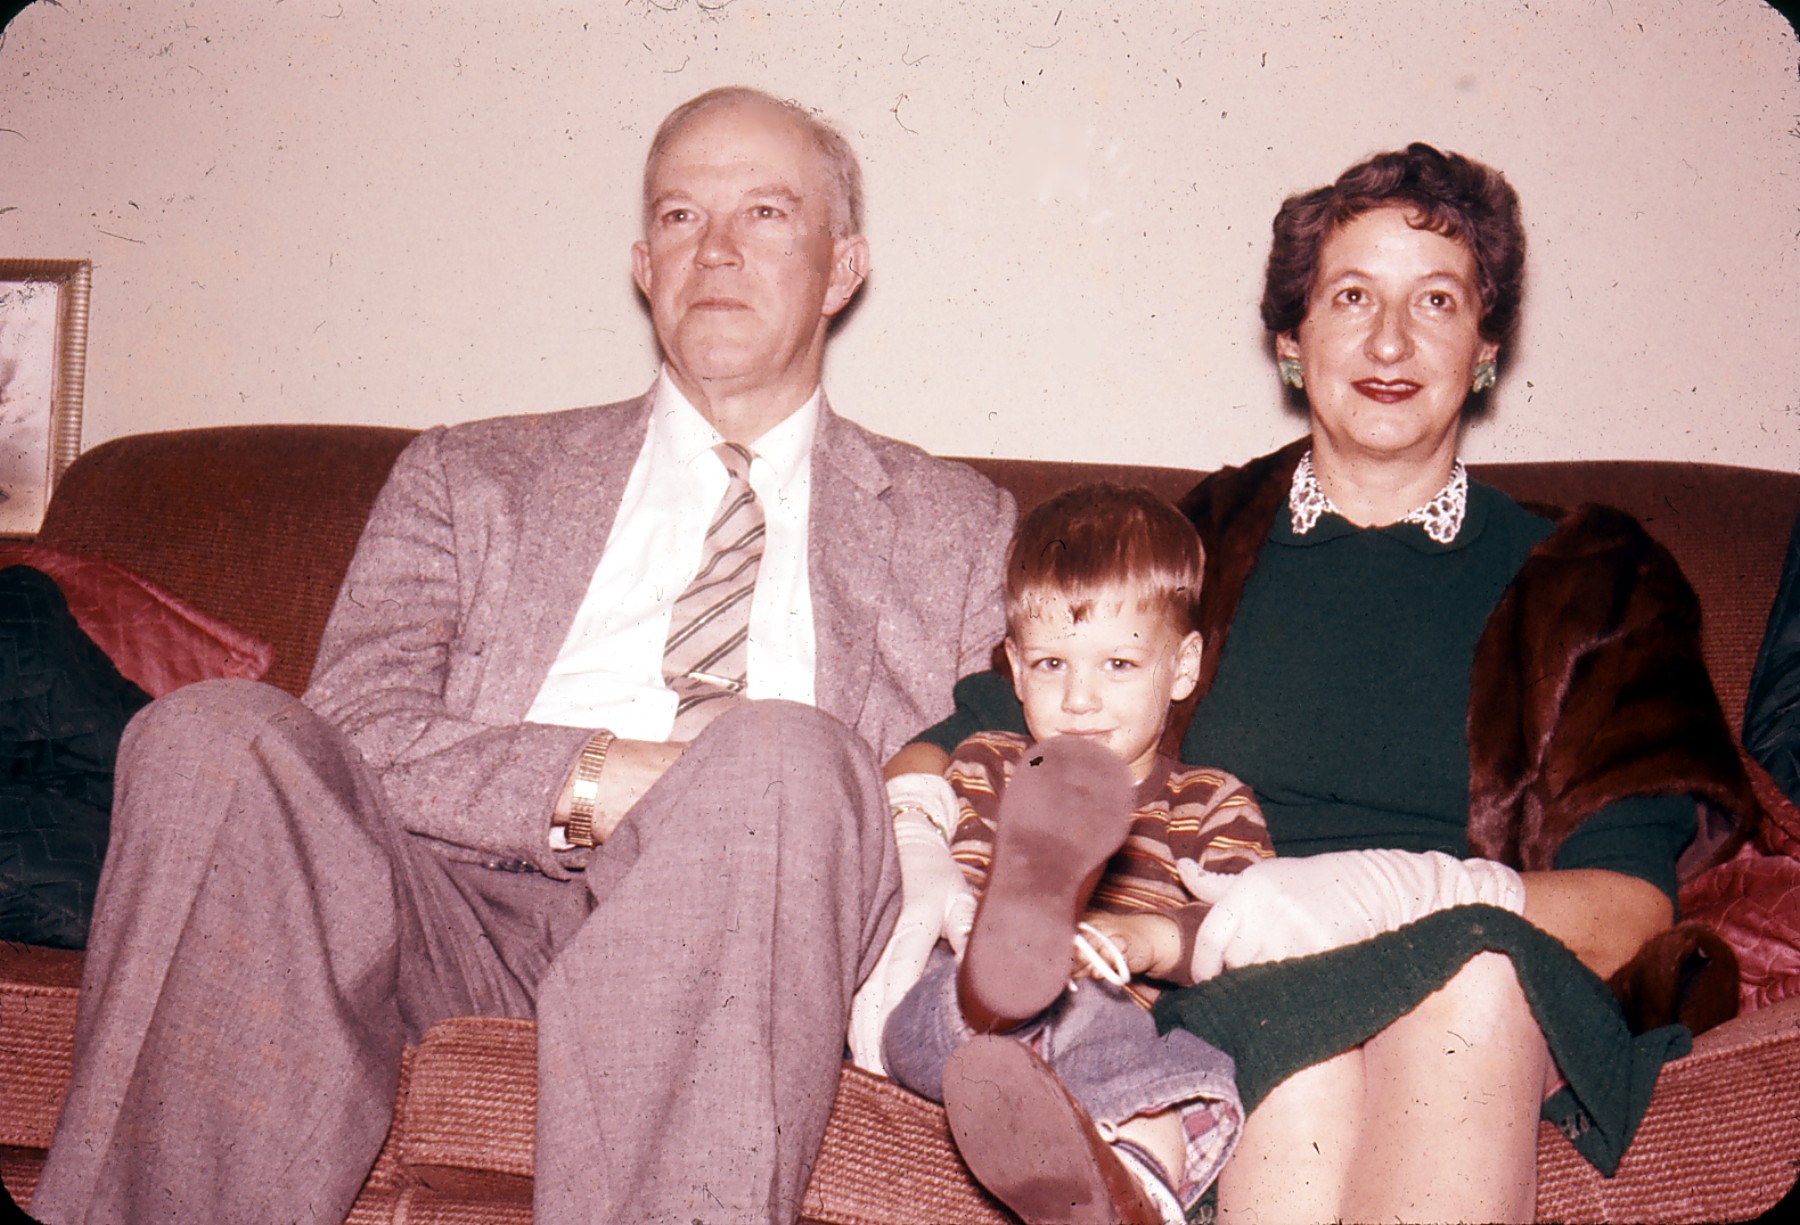 Bill and Mary (Christiano) Dumaresq. Grandson, Michael, in the middle. Circa 1960. Vancouver, BC